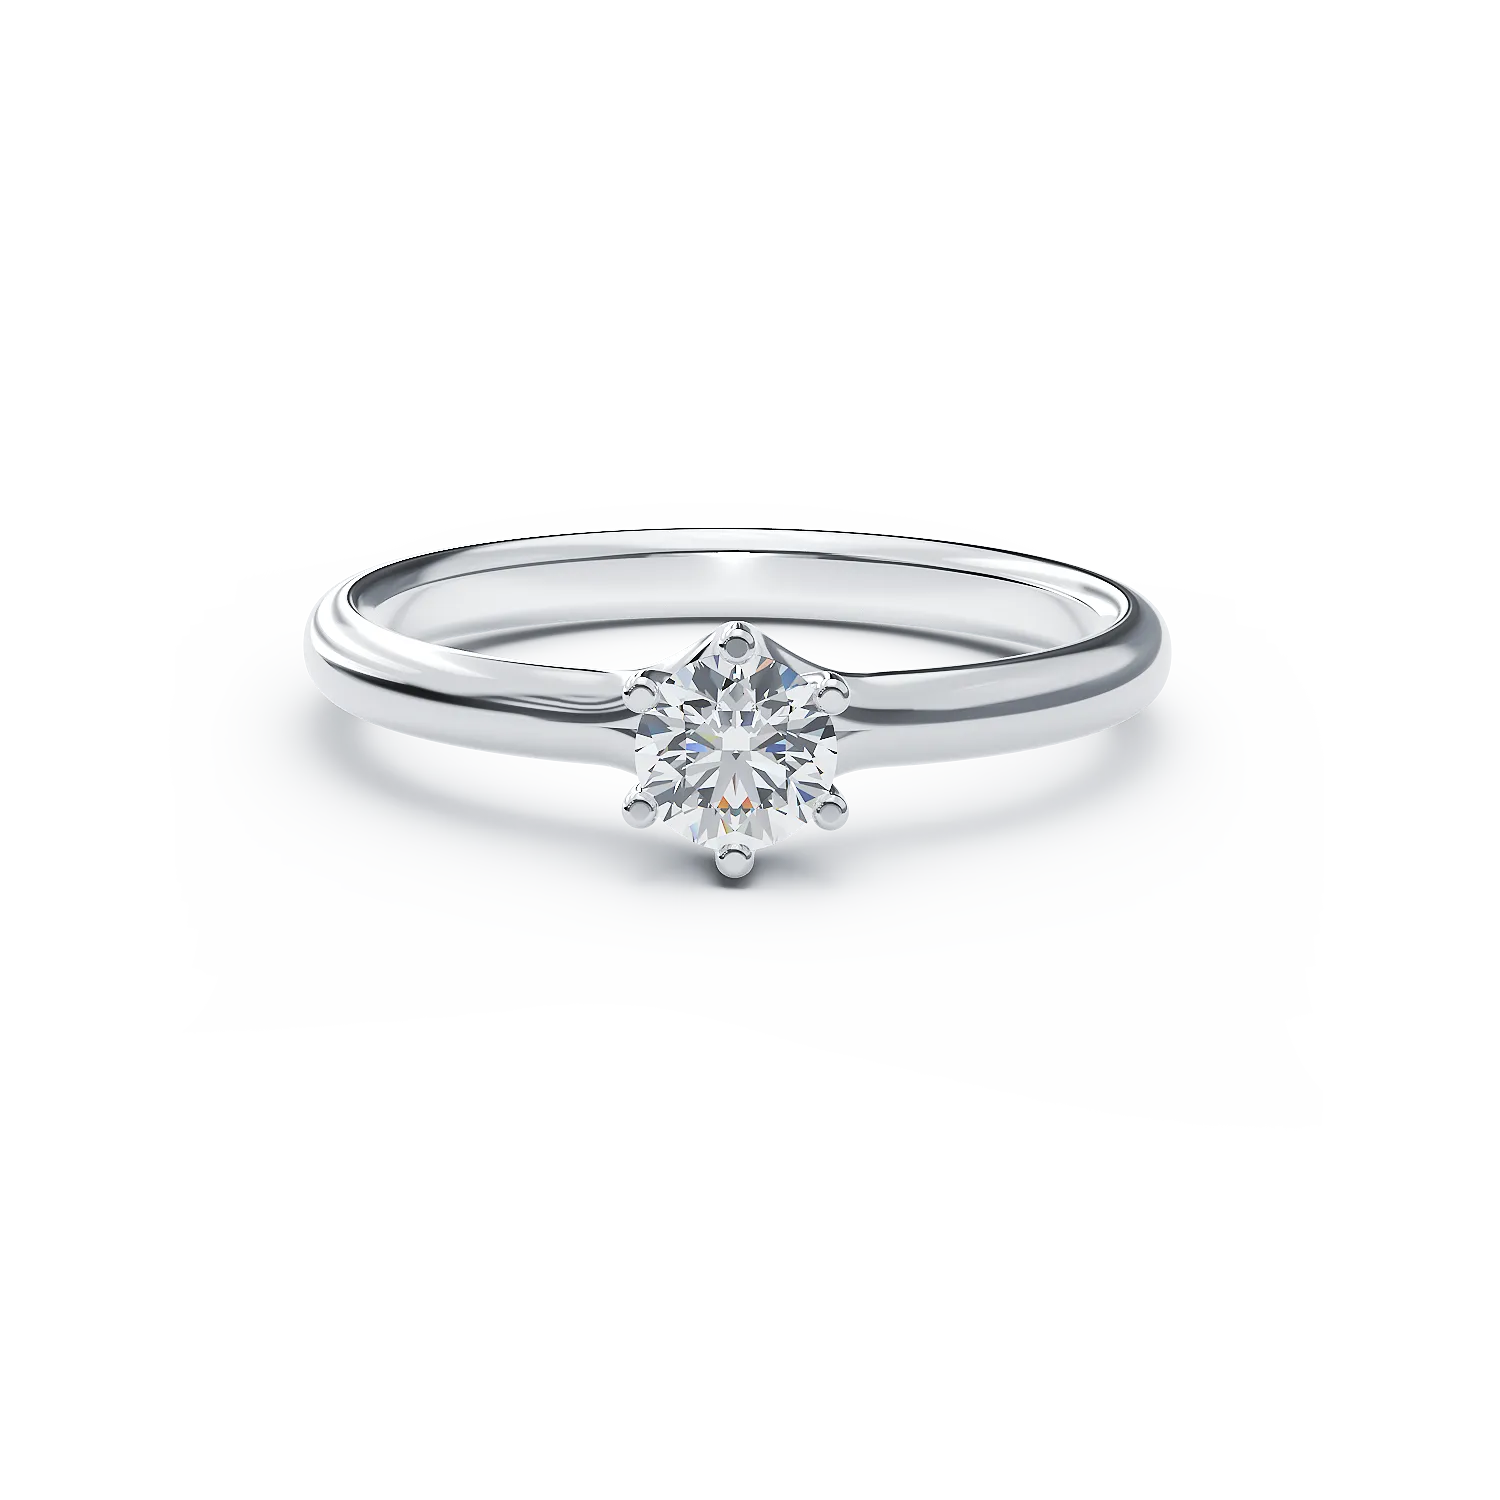 18K white gold engagement ring with 0.305ct diamond